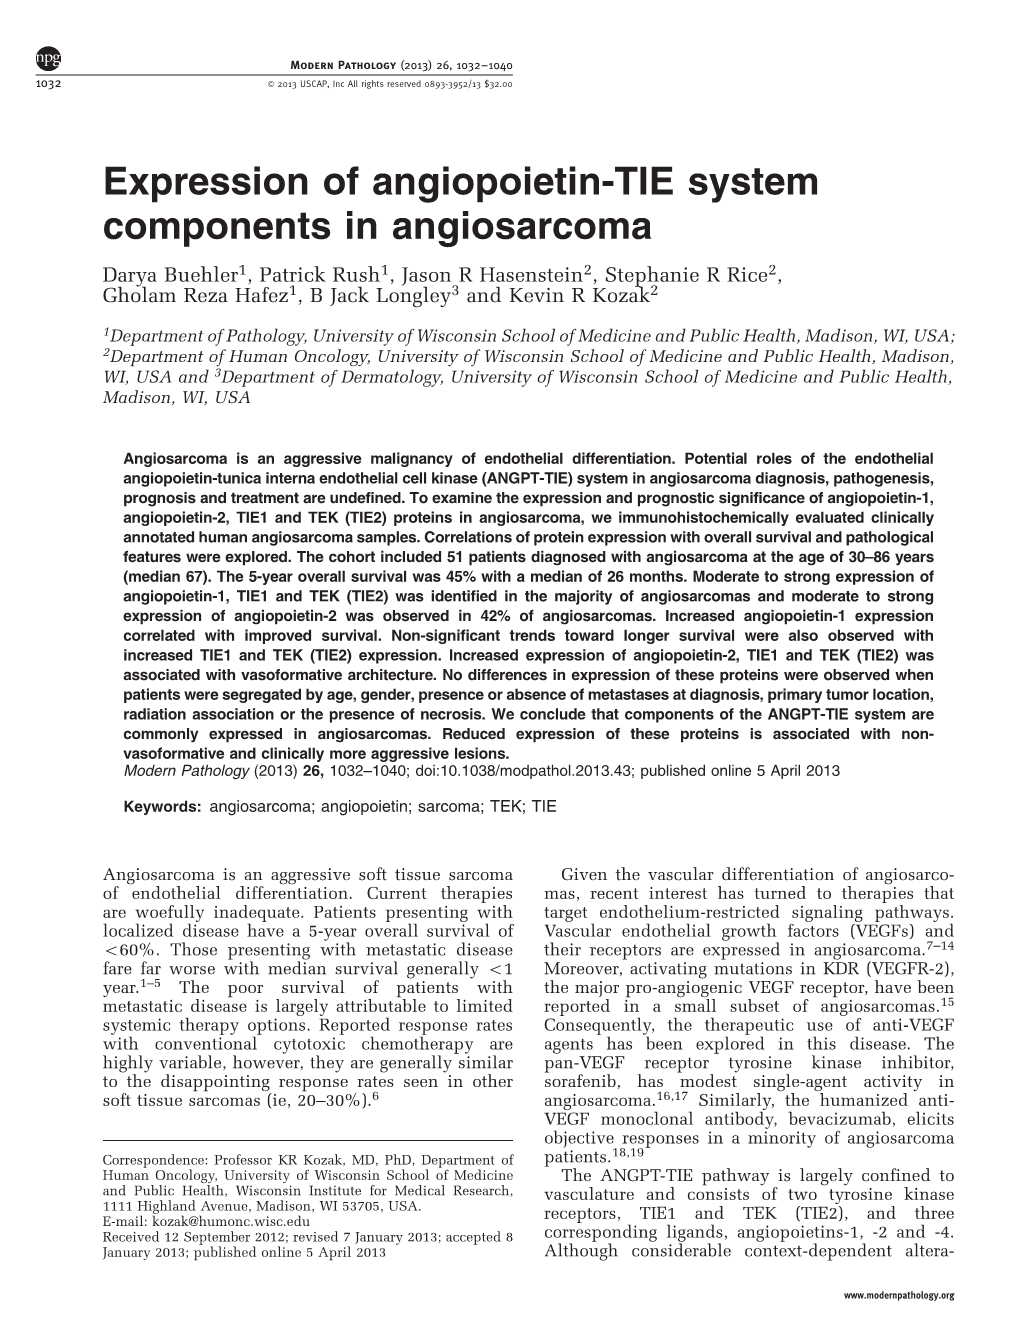 Expression of Angiopoietin-TIE System Components in Angiosarcoma